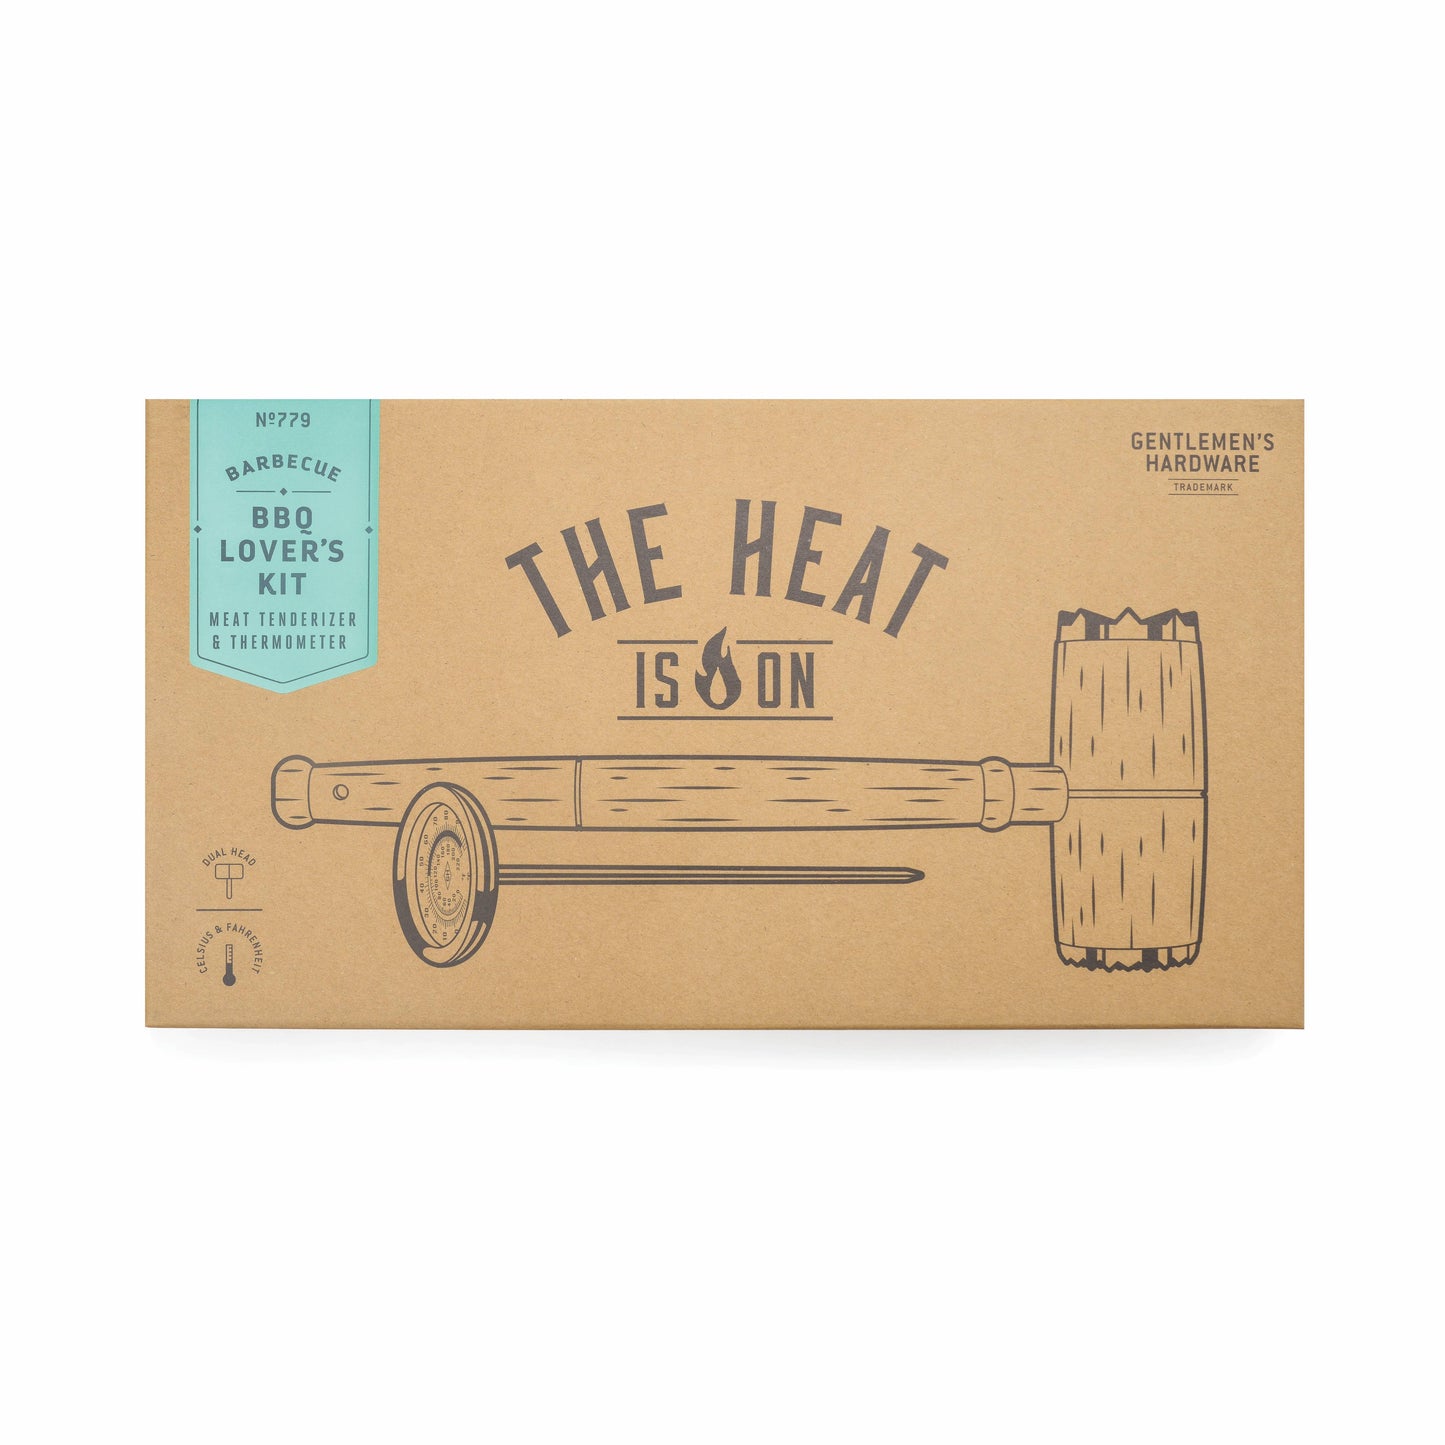 "Bbq Lovers Kit" Meat Tenderizer & Thermometer"